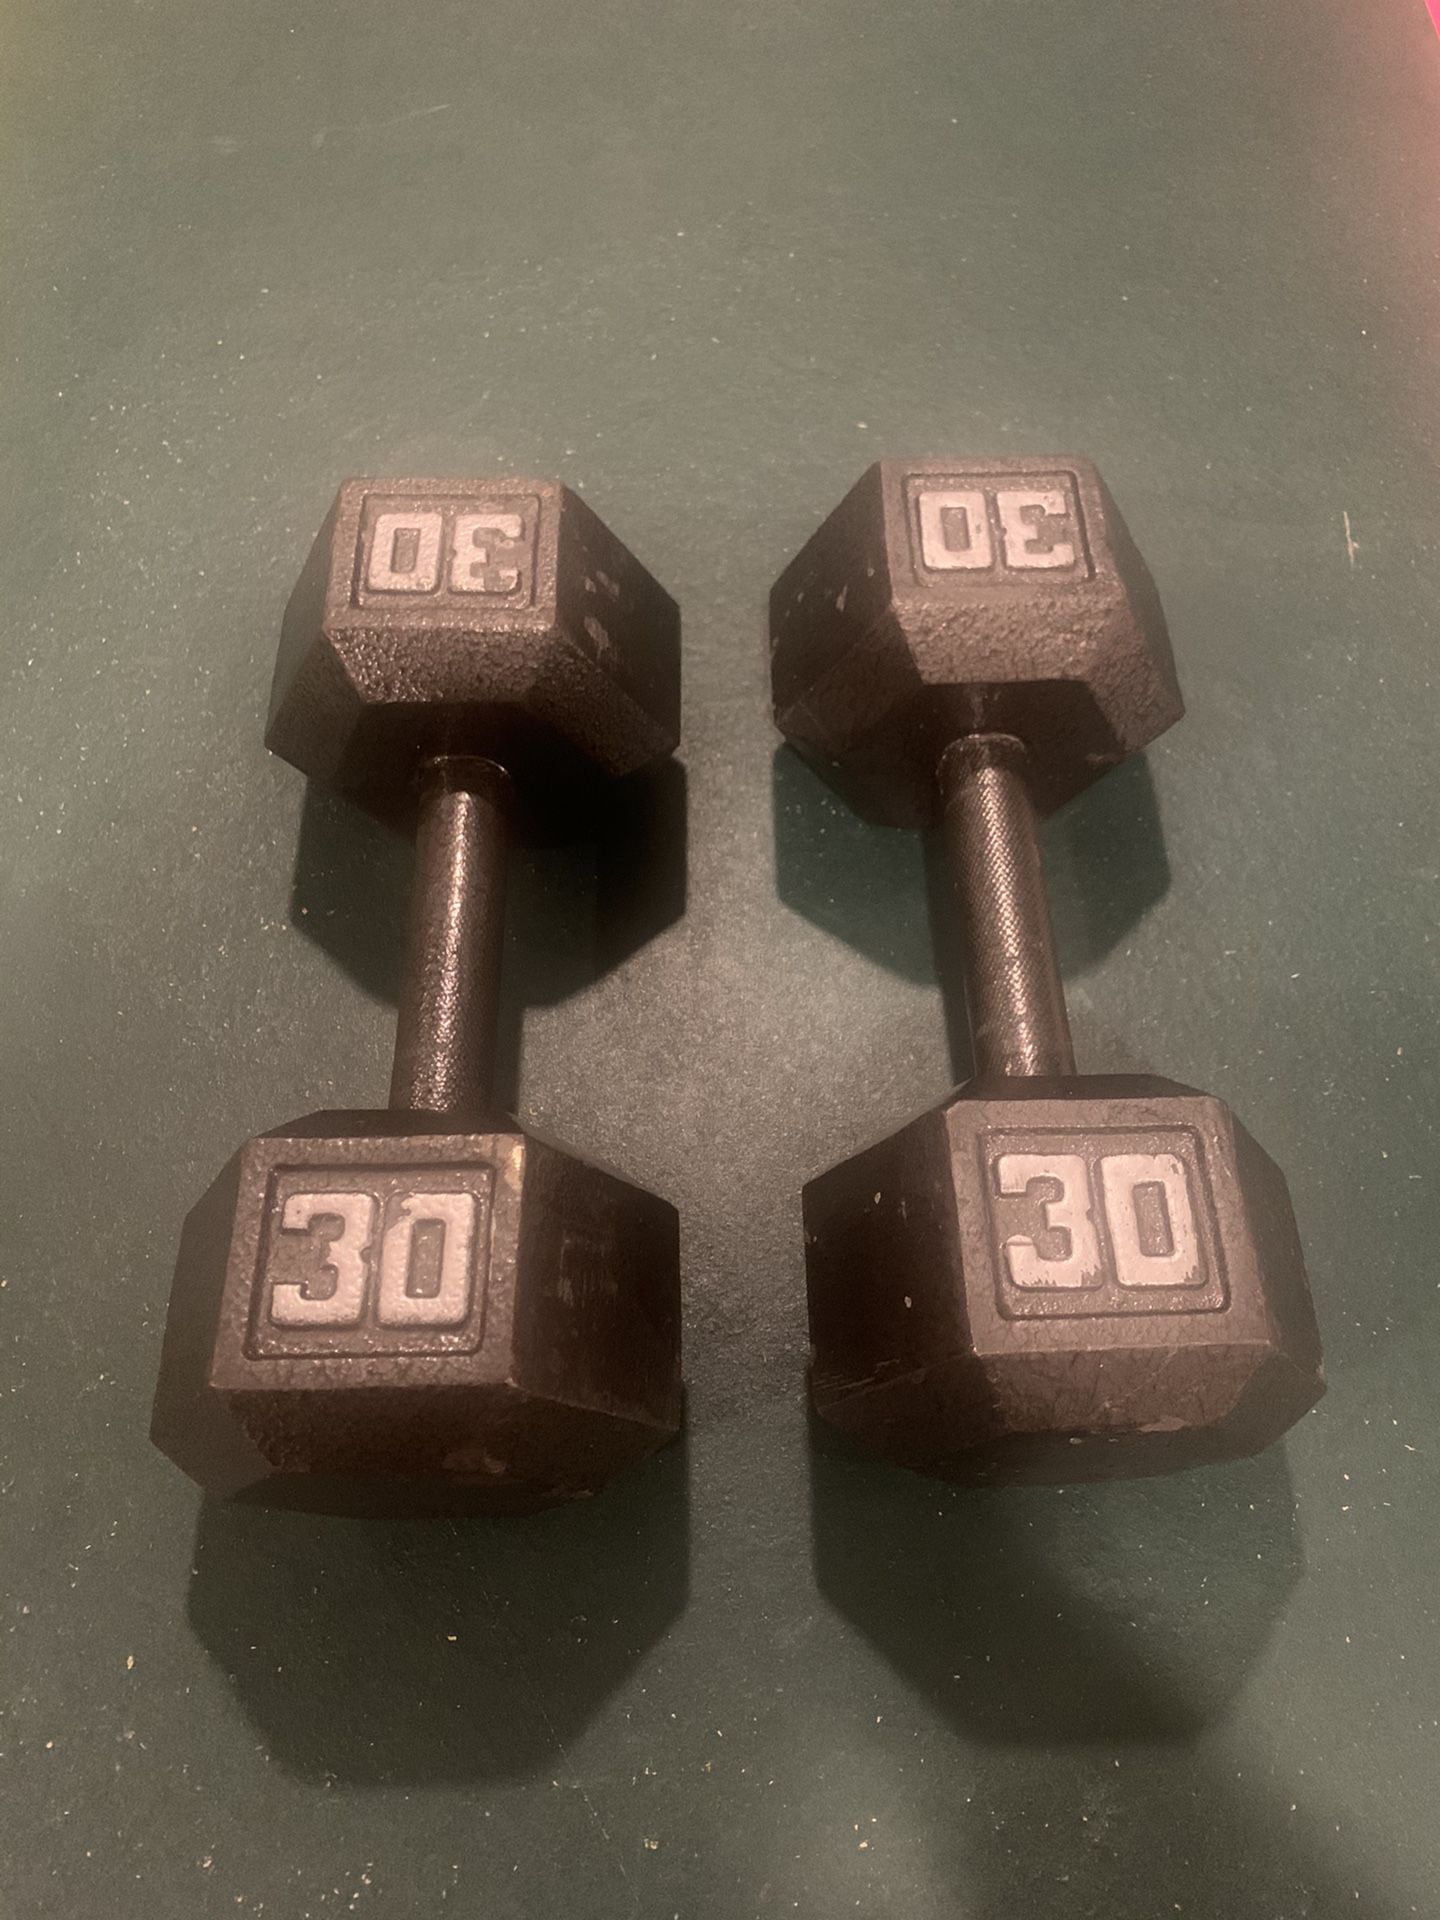 Used 30 lbs Metal Dumbbell Set (60 lbs total) <$1.25 a lb